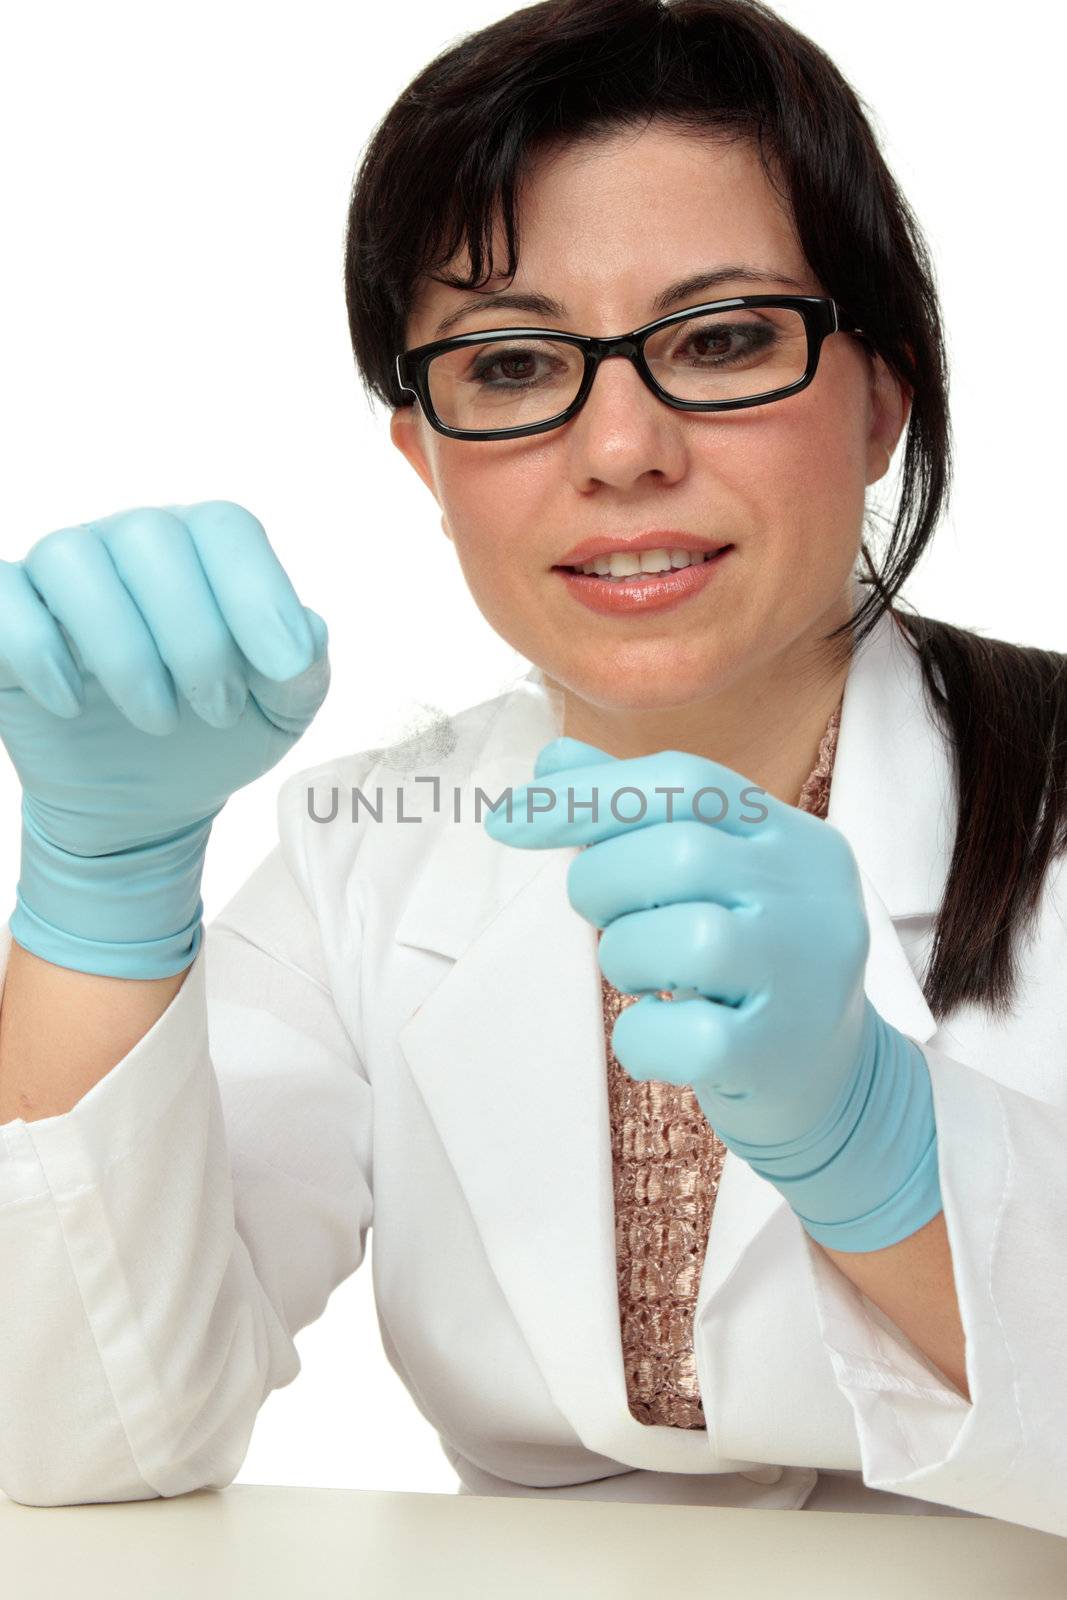 Crime scene investigator or forensic criminologist expert holding a fingerprint sample exposed with latent powder and lifted with tape.  White background.